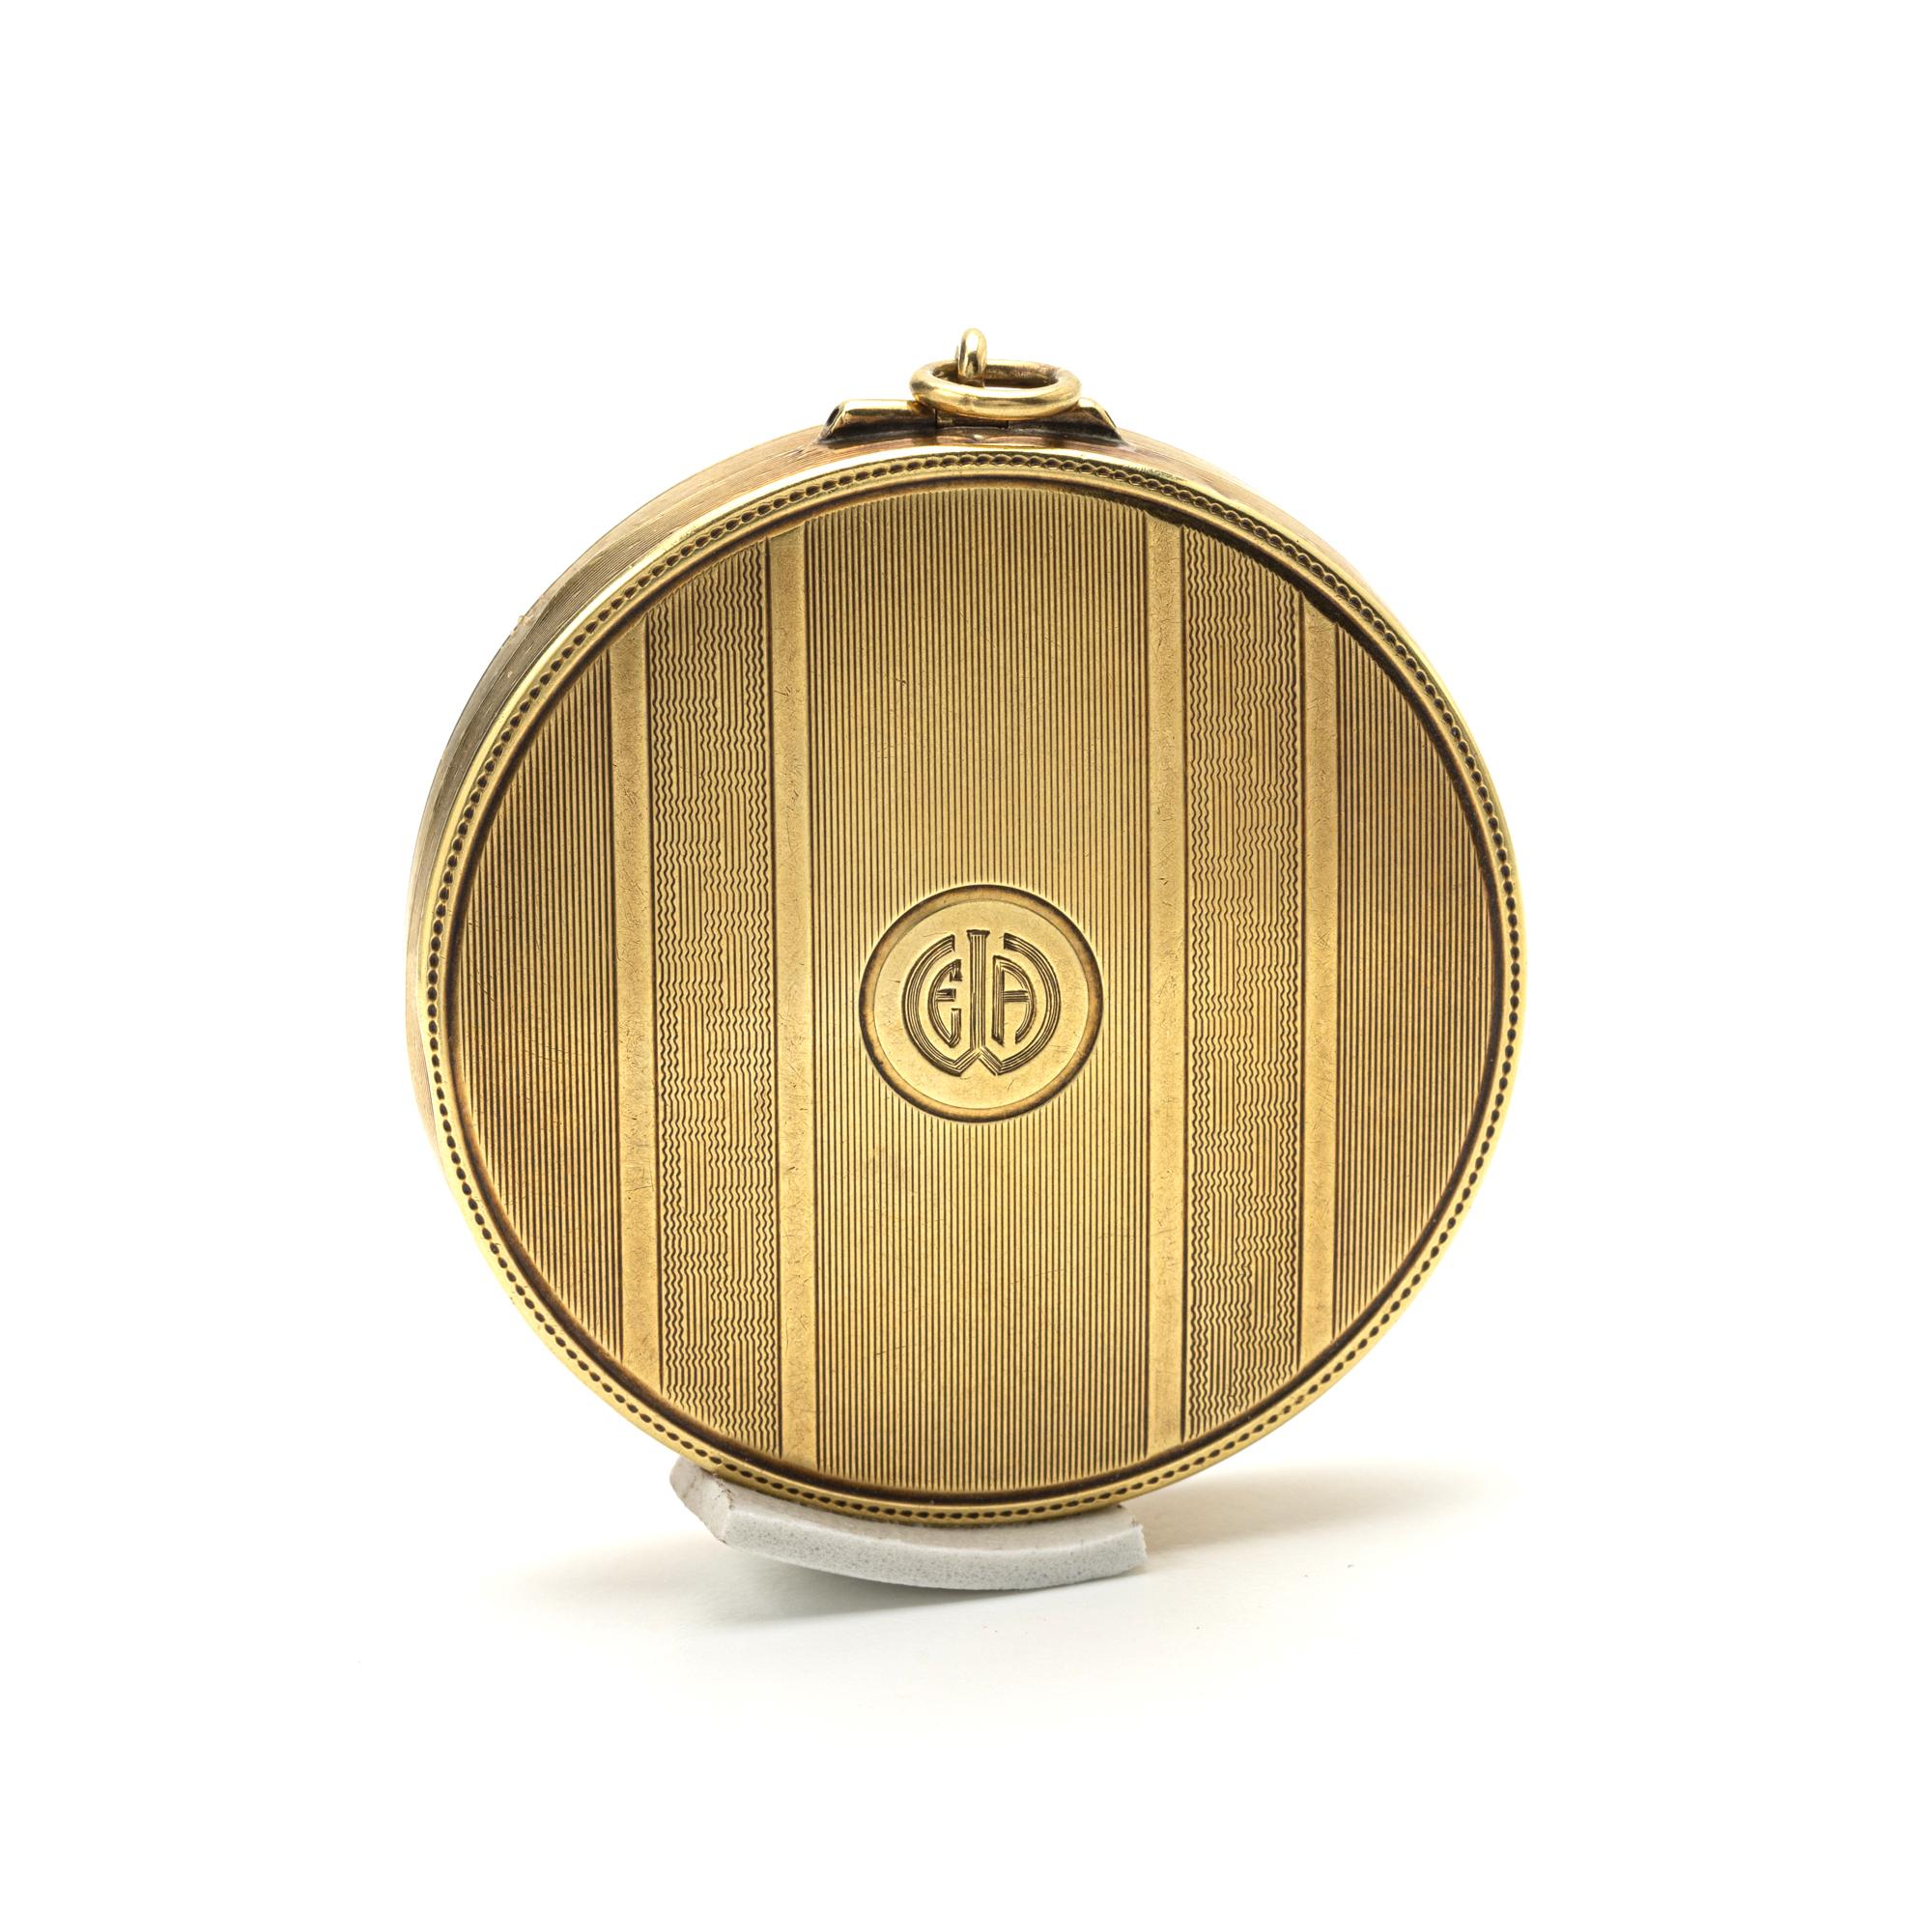 
A compact of textured gold patterns, opening to reveal a fitted mirror, of 14 karat yellow gold; stamped 14k.
1 3/4 inch diameter
weight 30 grams